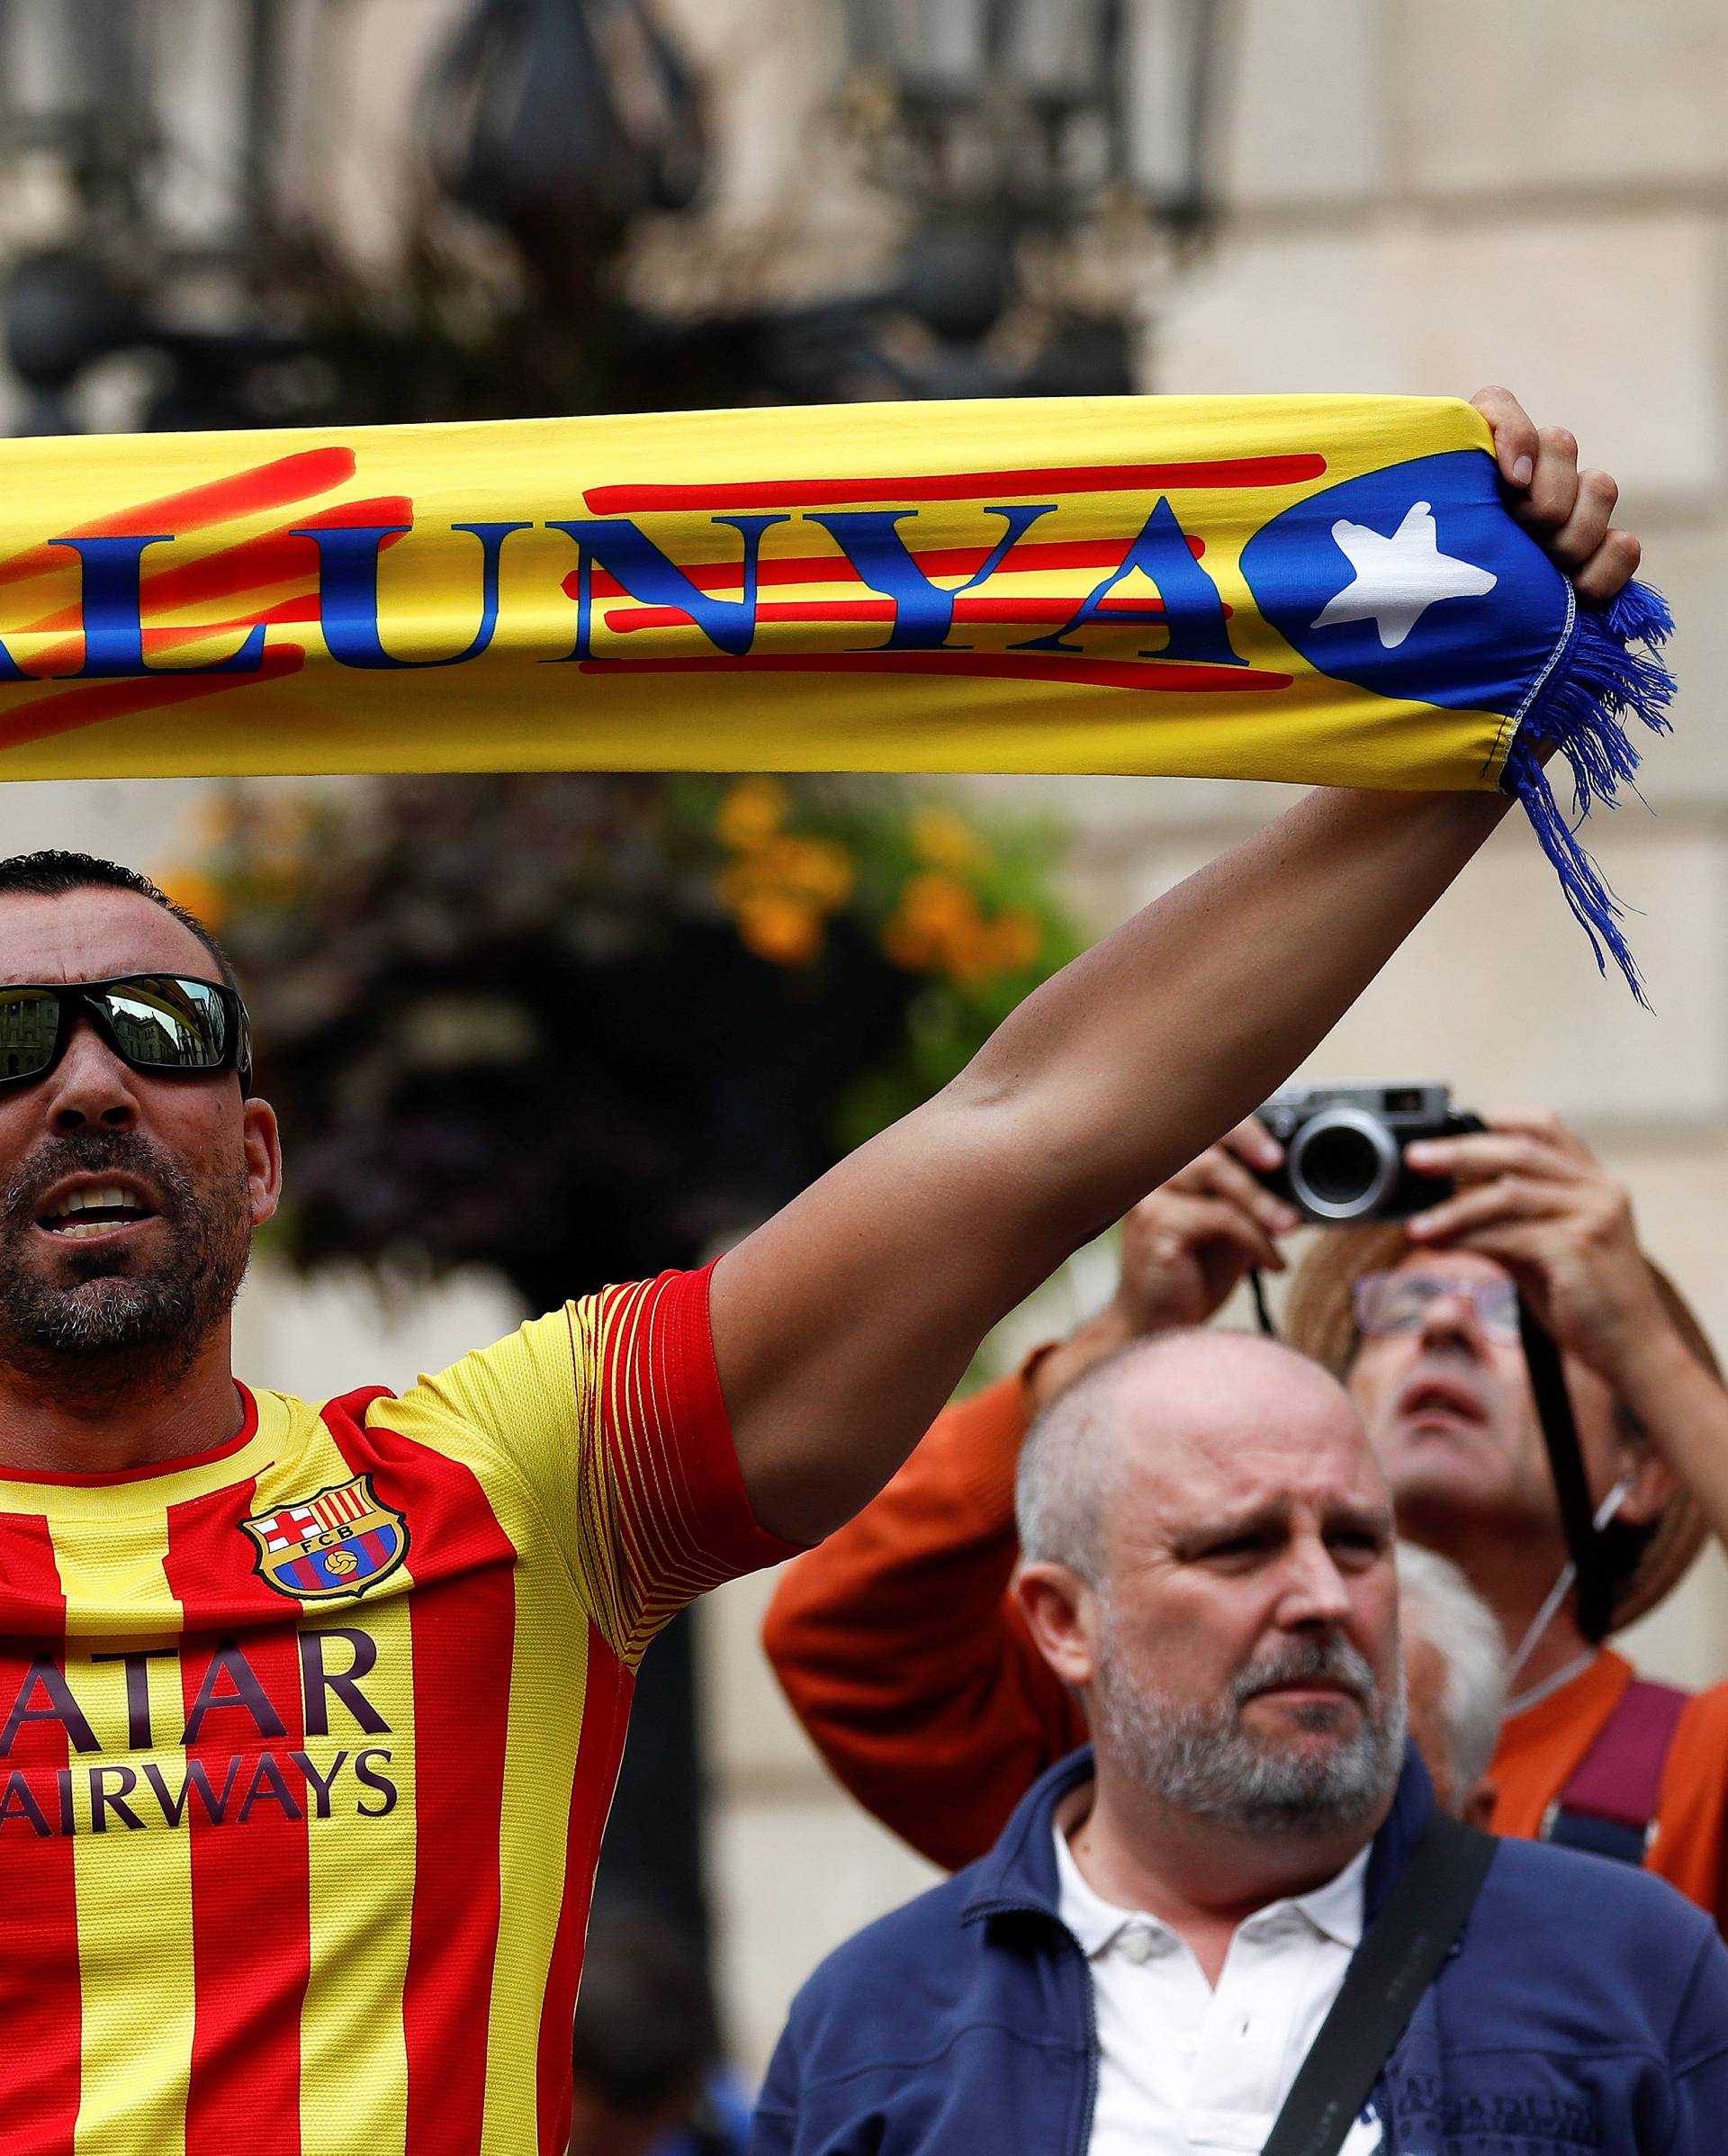 A man holds up a banner during a protest in Plaza Sant Jaume in Barcelona